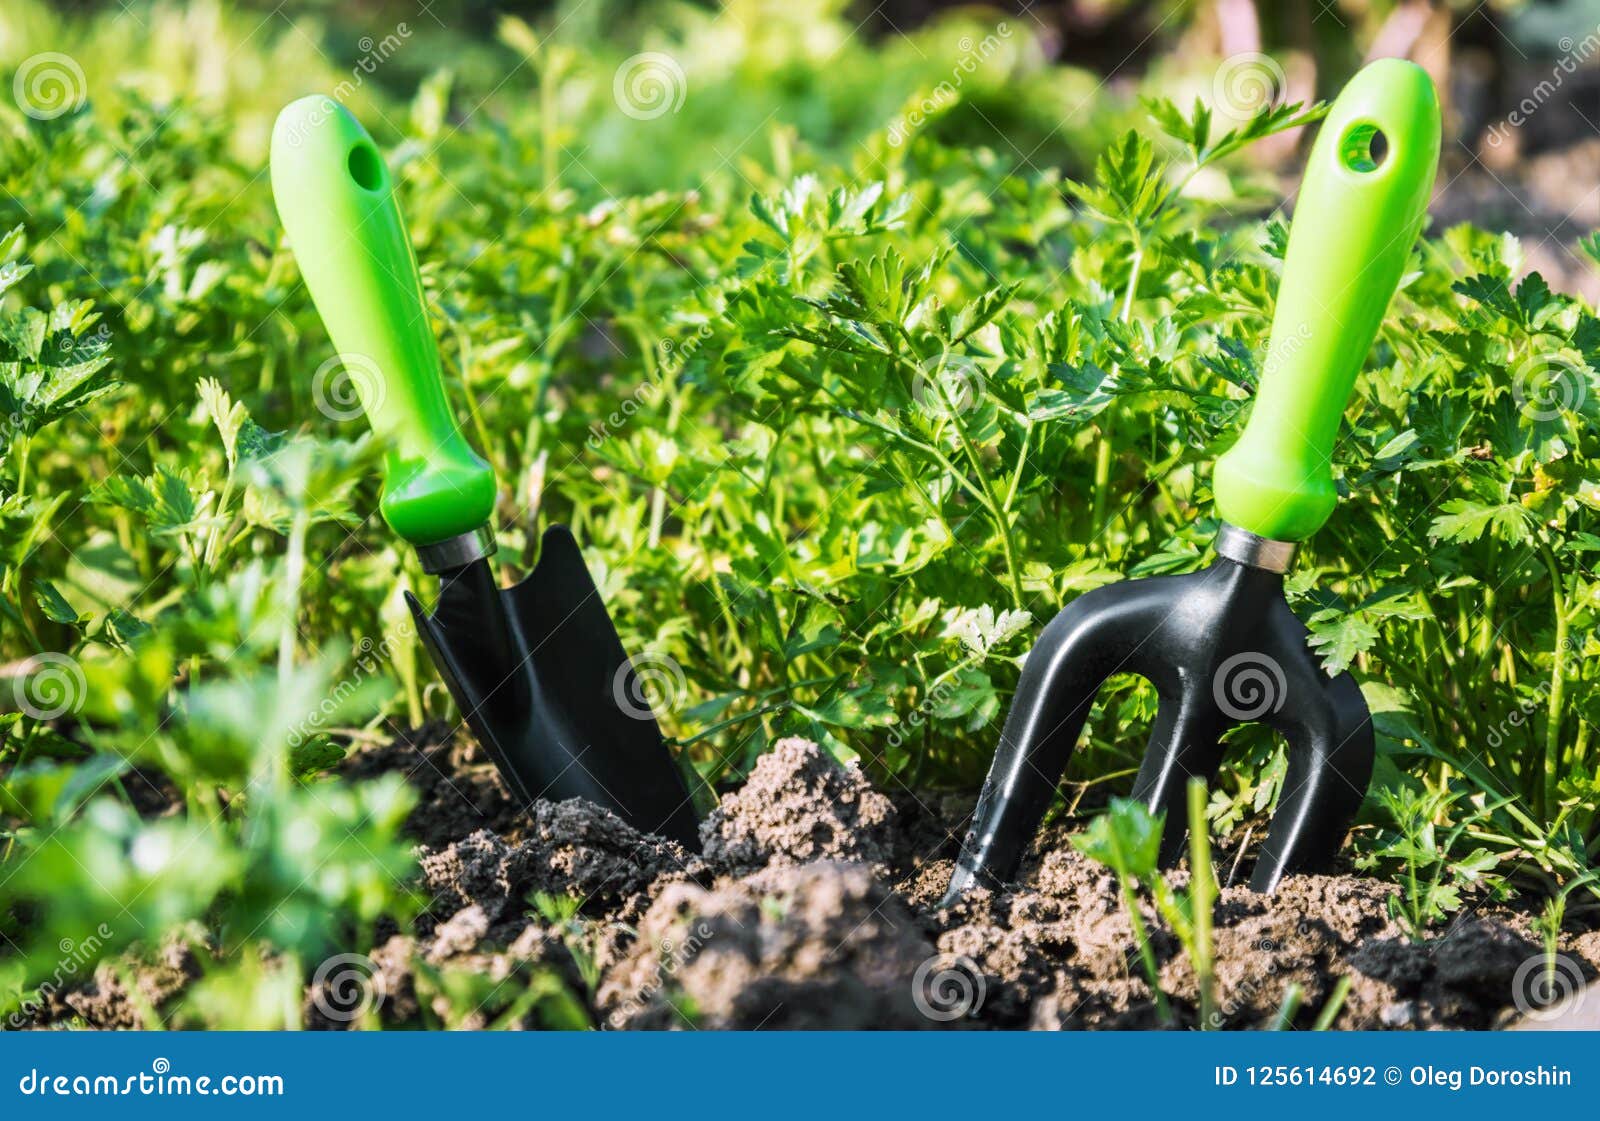 Garden Tools Stuck into the Ground To Work Stock Photo - Image of ...